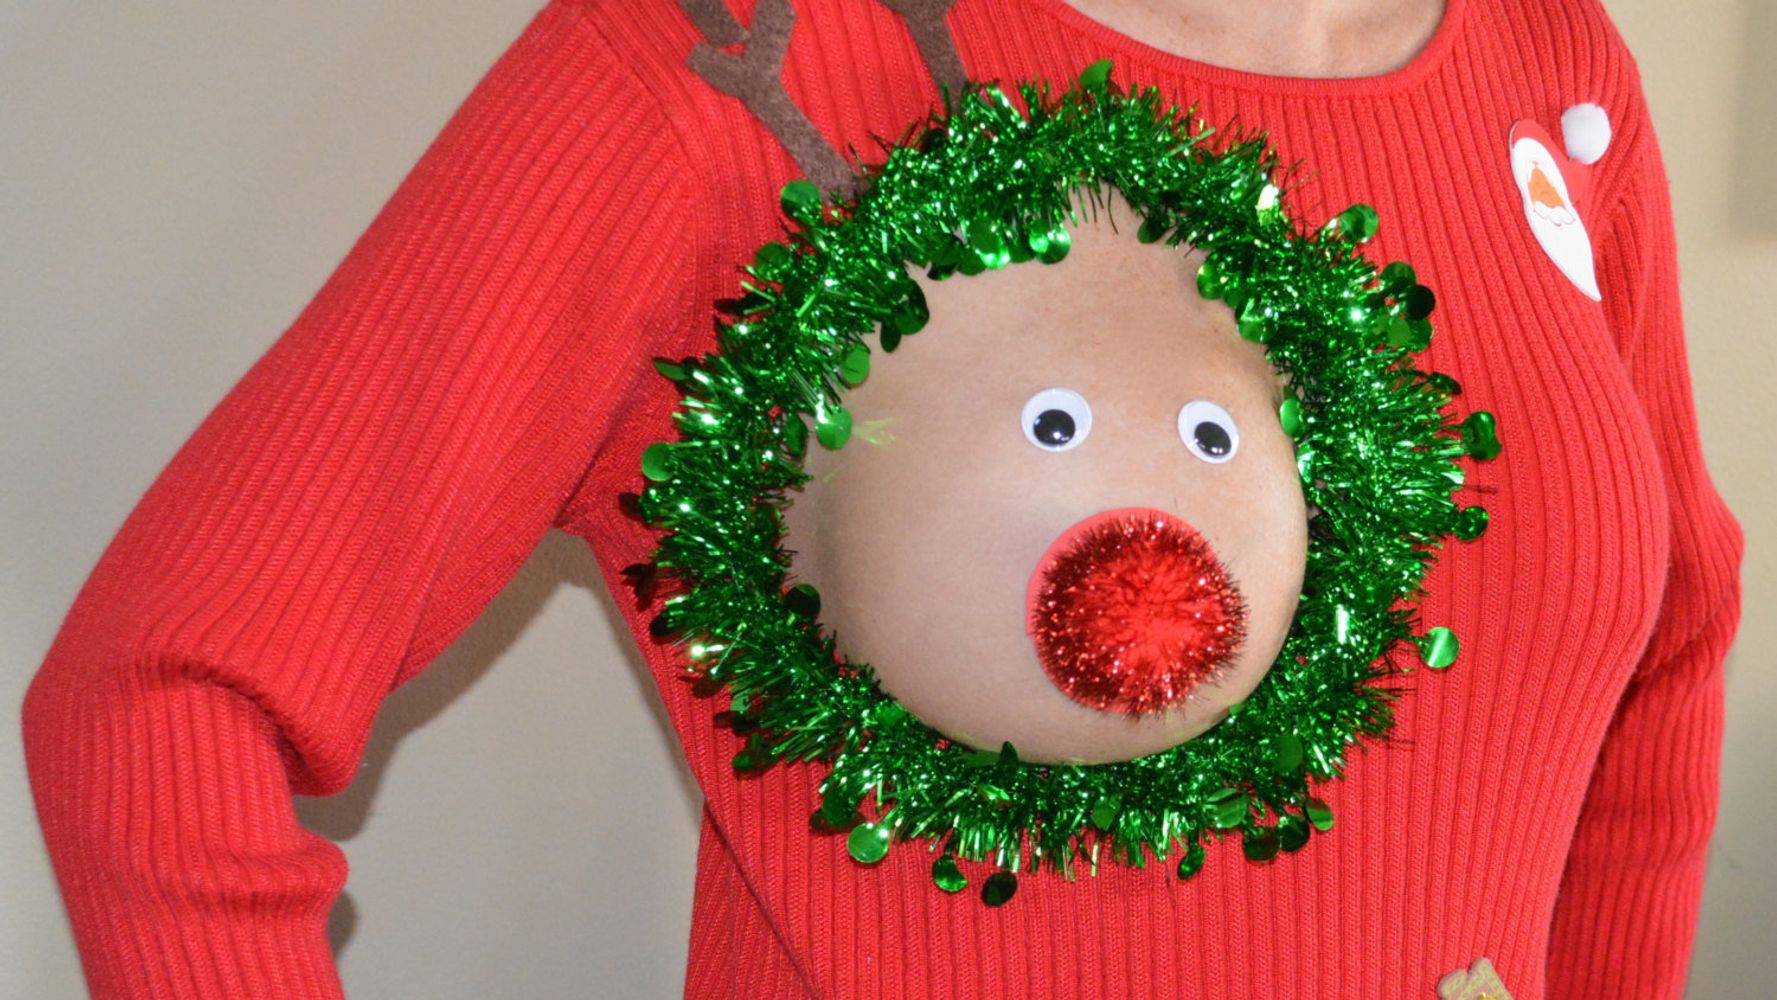 The Perfect Ugly Christmas Sweater For Breastfeeding Moms.